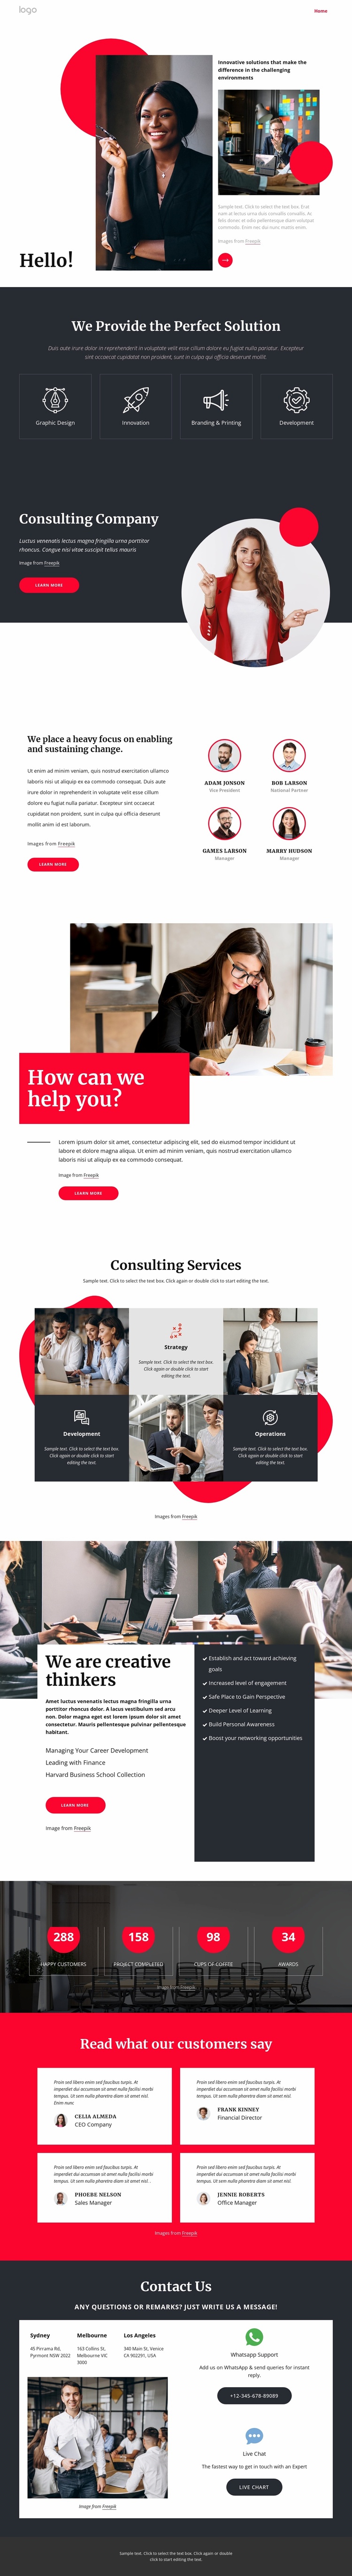 Consulting company NYC Landing Page